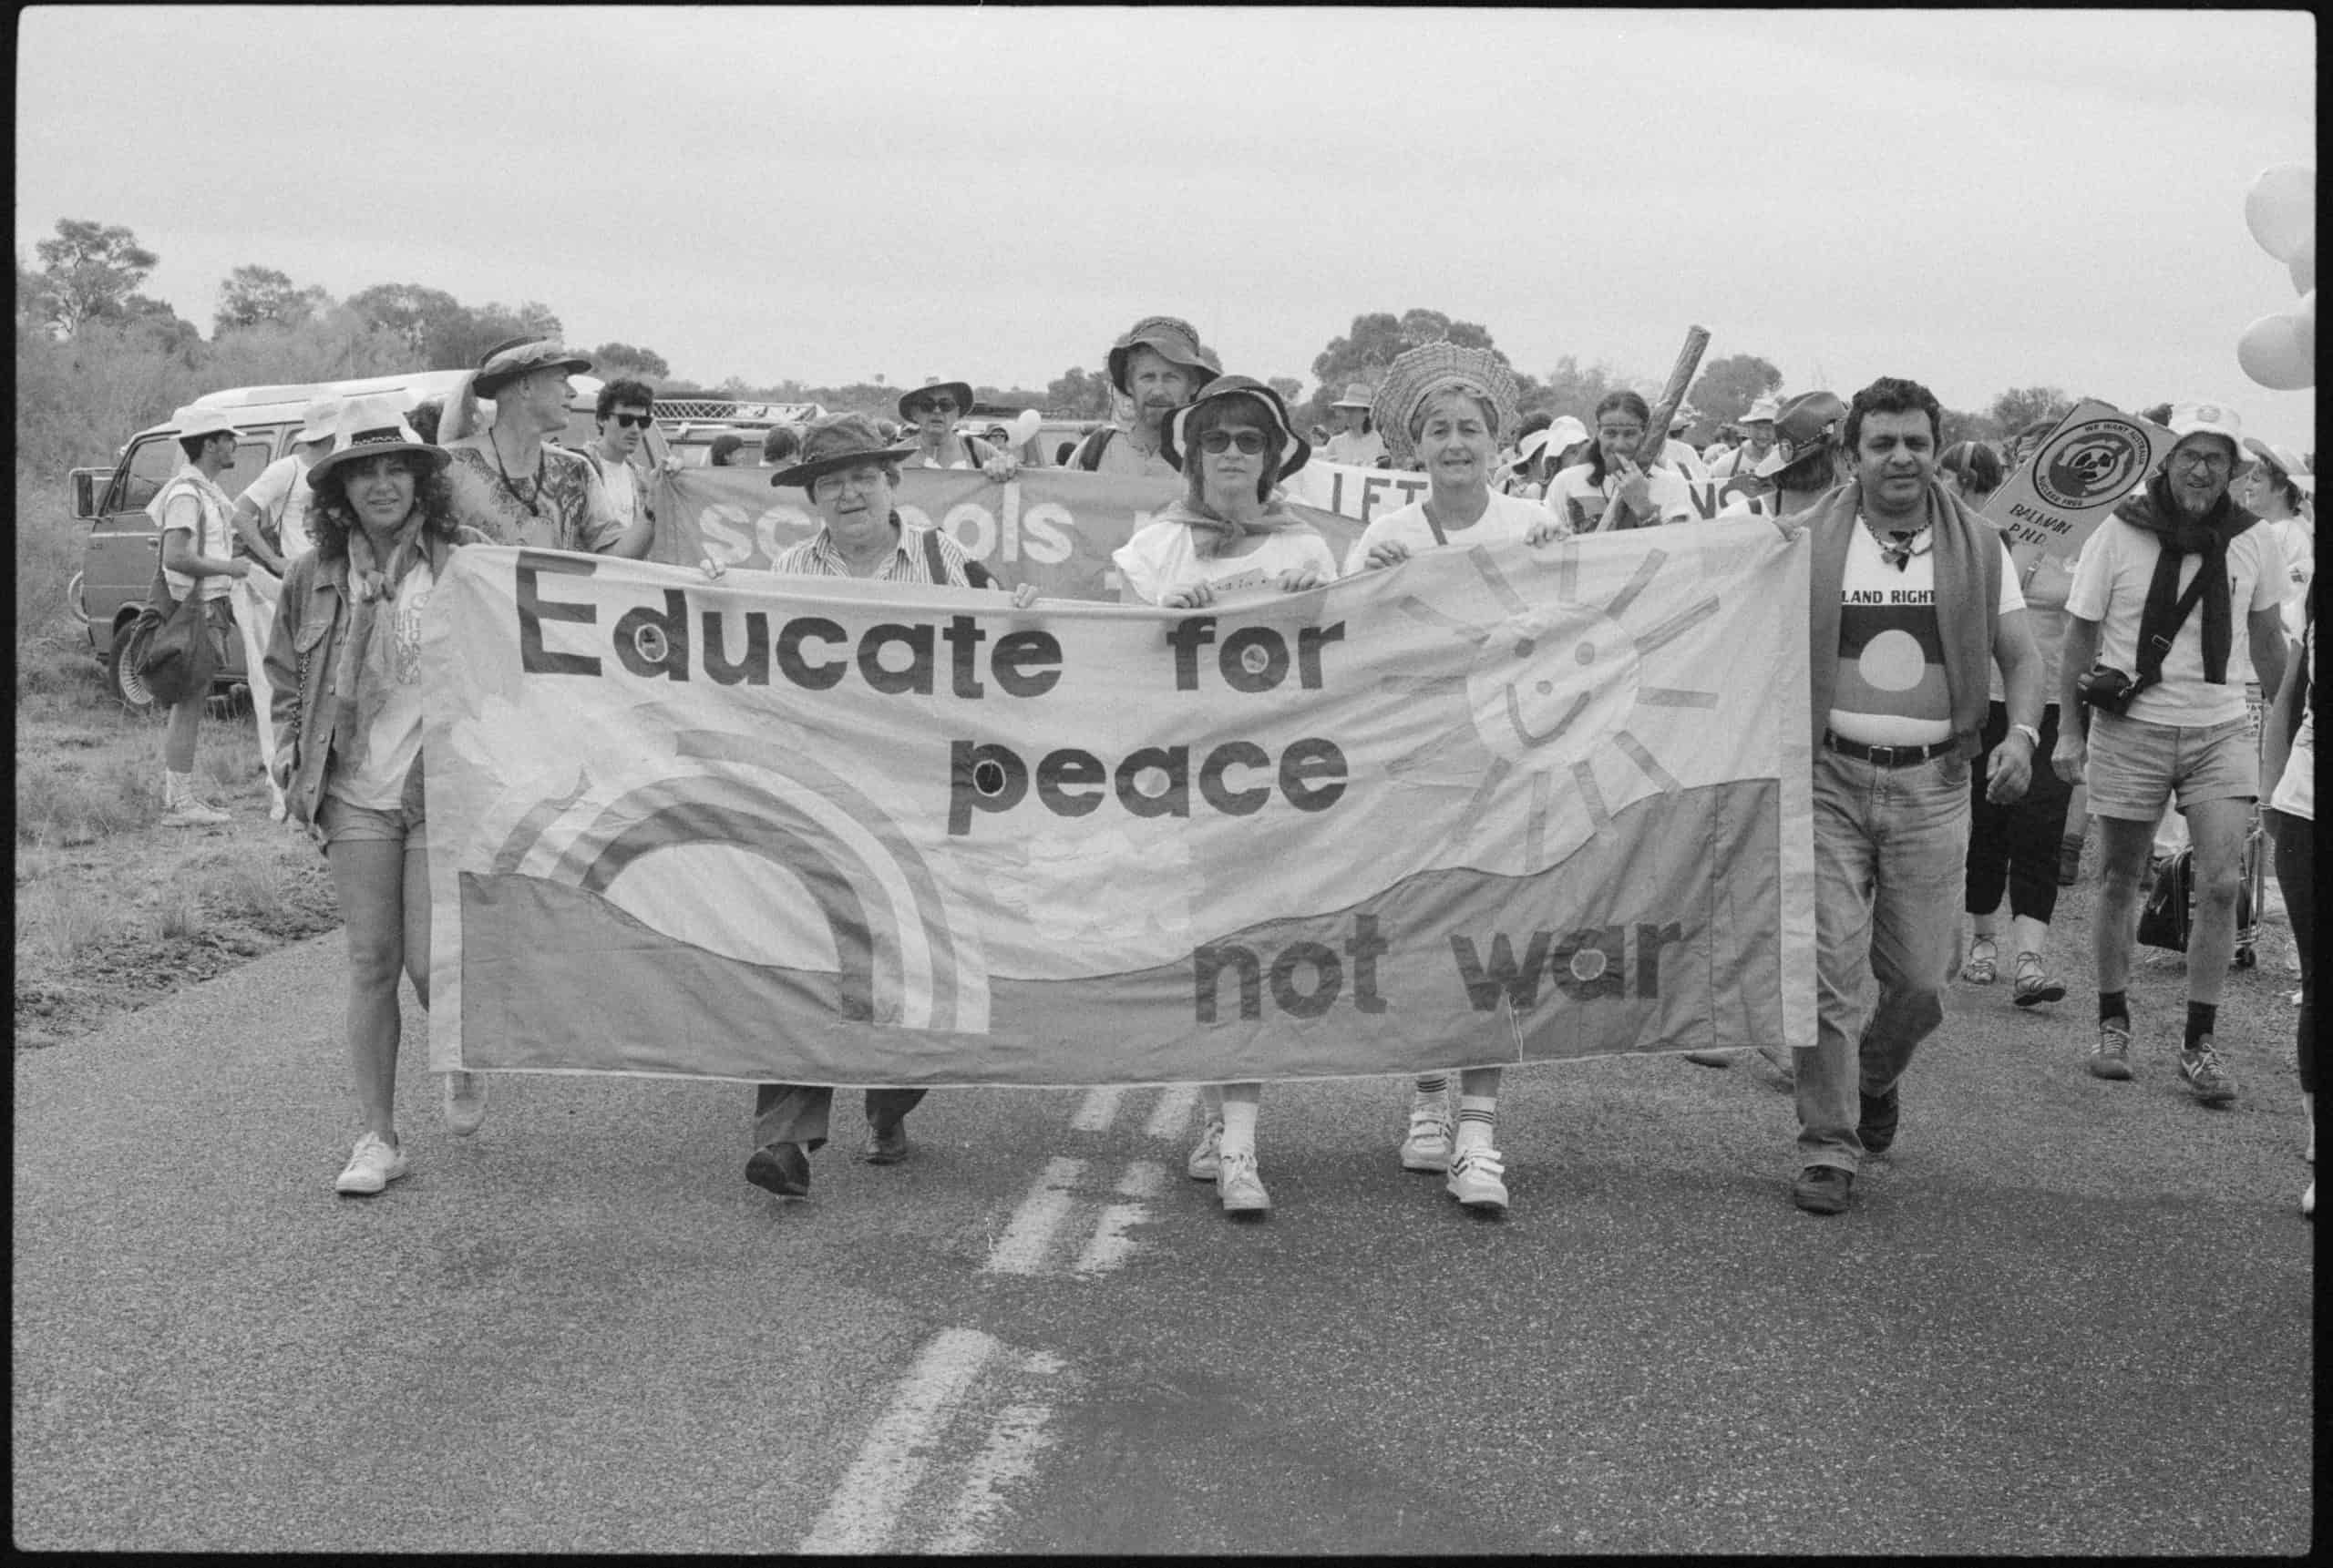 protestors walking along road carrying banner with a picture of a rainbow that reads Educate for peace not war